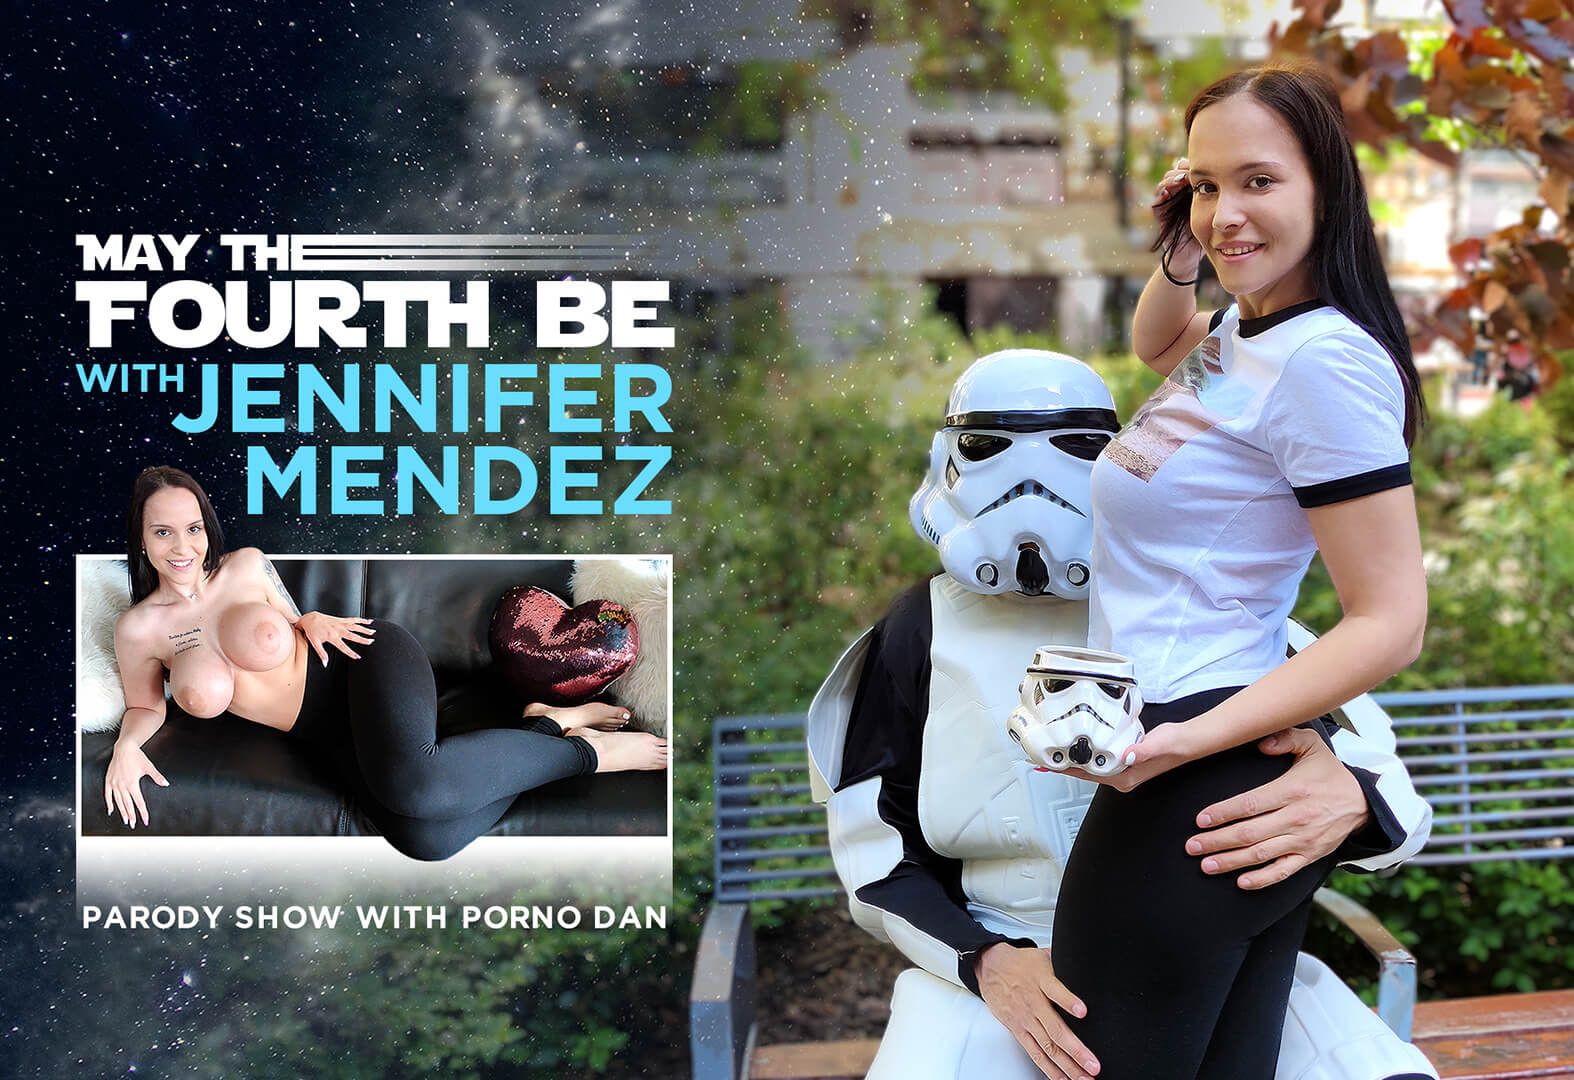 May the Fourth be with Jennifer Mendez